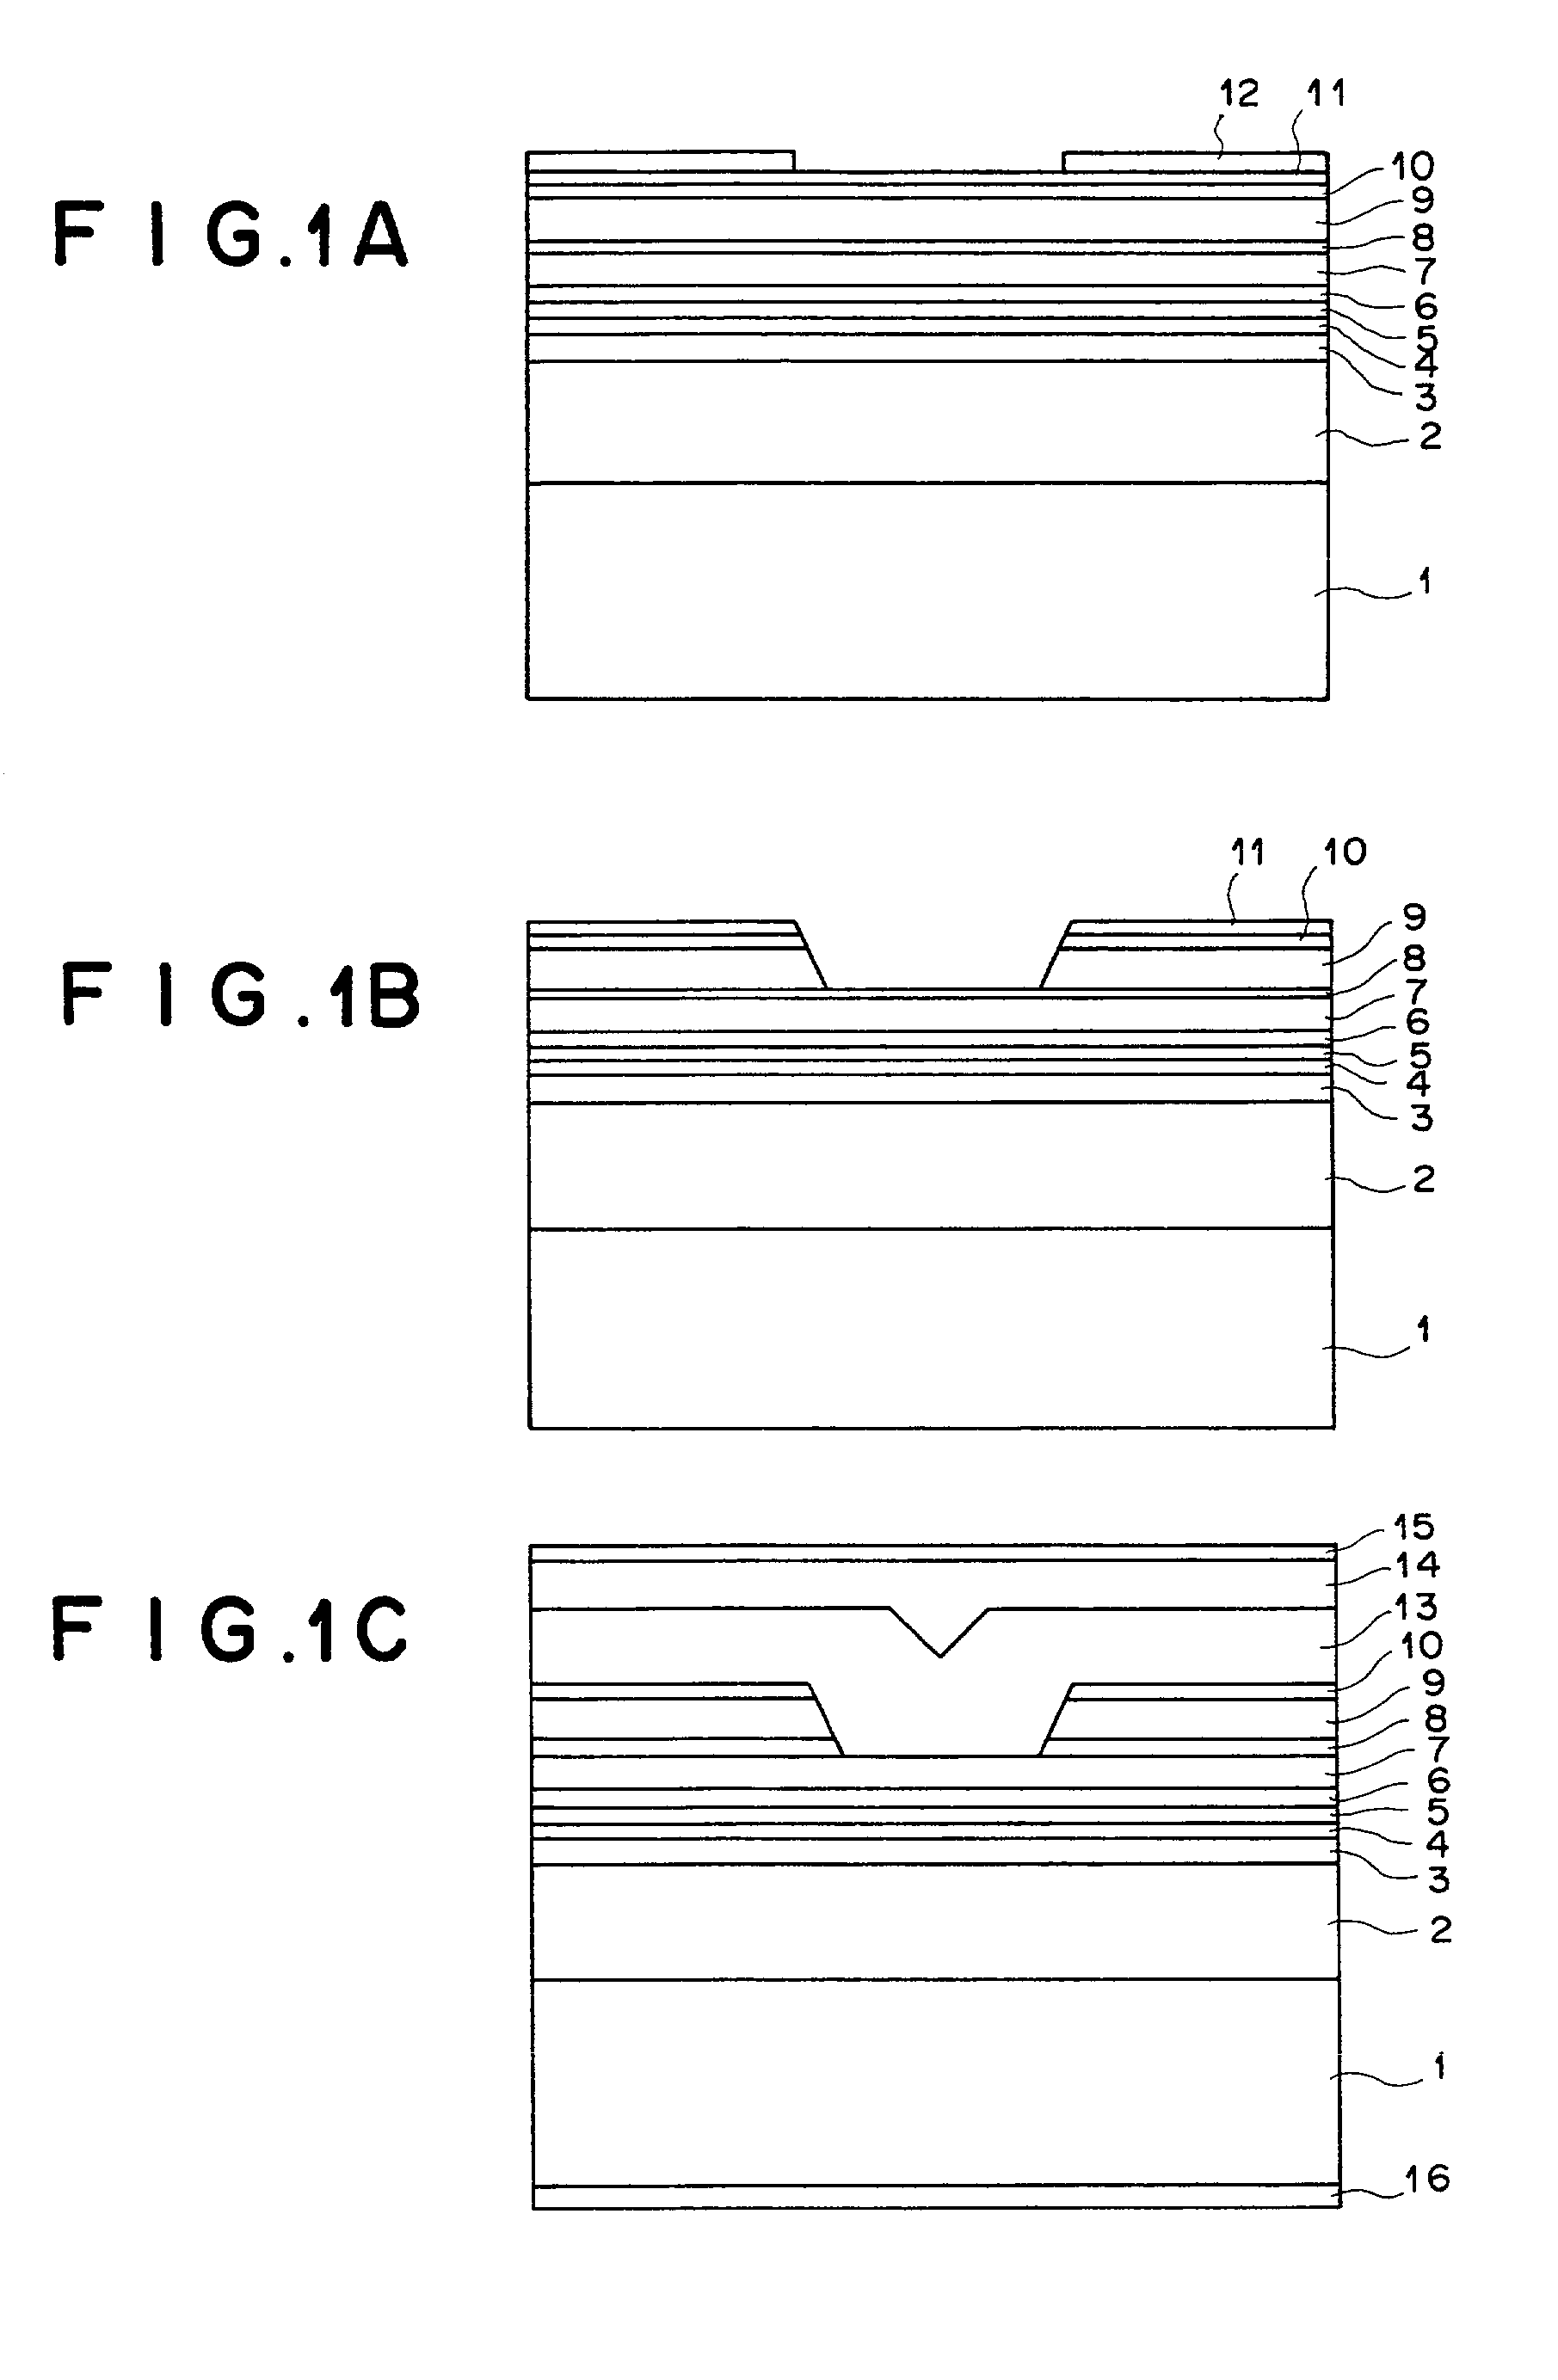 Semiconductor laser device having inGaAs compressive-strain active layer, GaAsP tensile-strain barrier layers, and InGaP optical waveguide layers